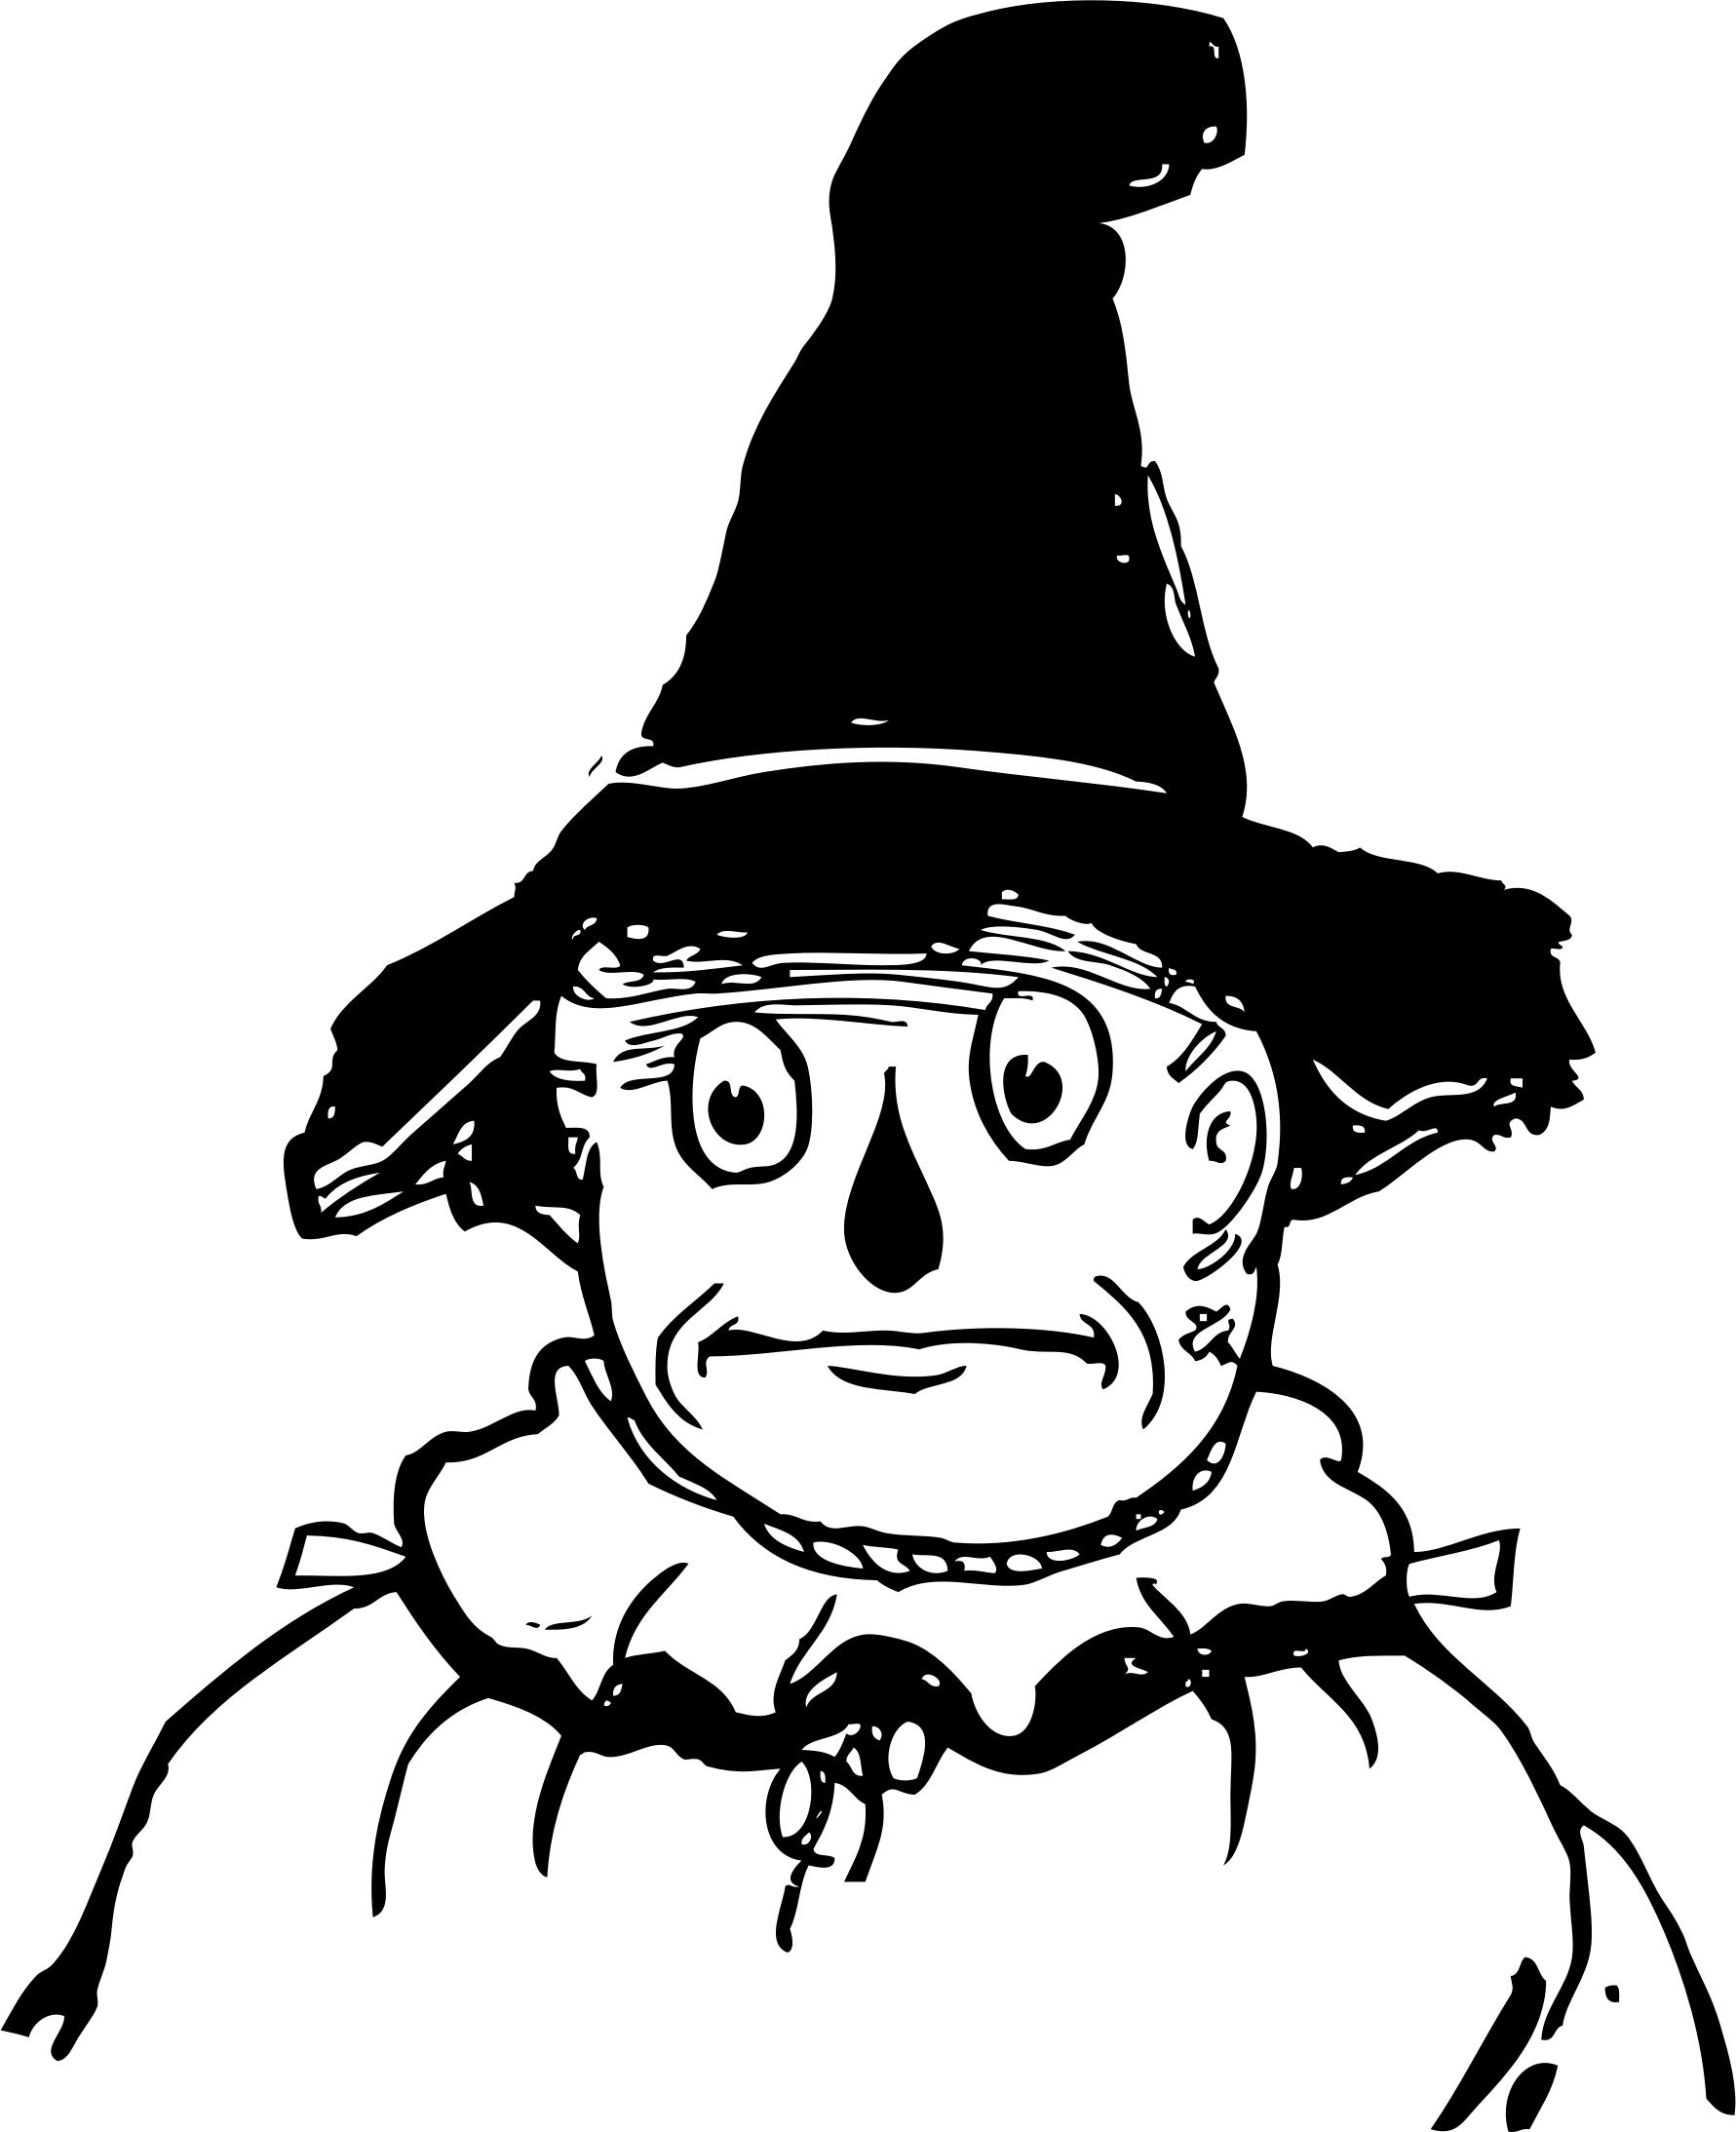 The Scarecrow png